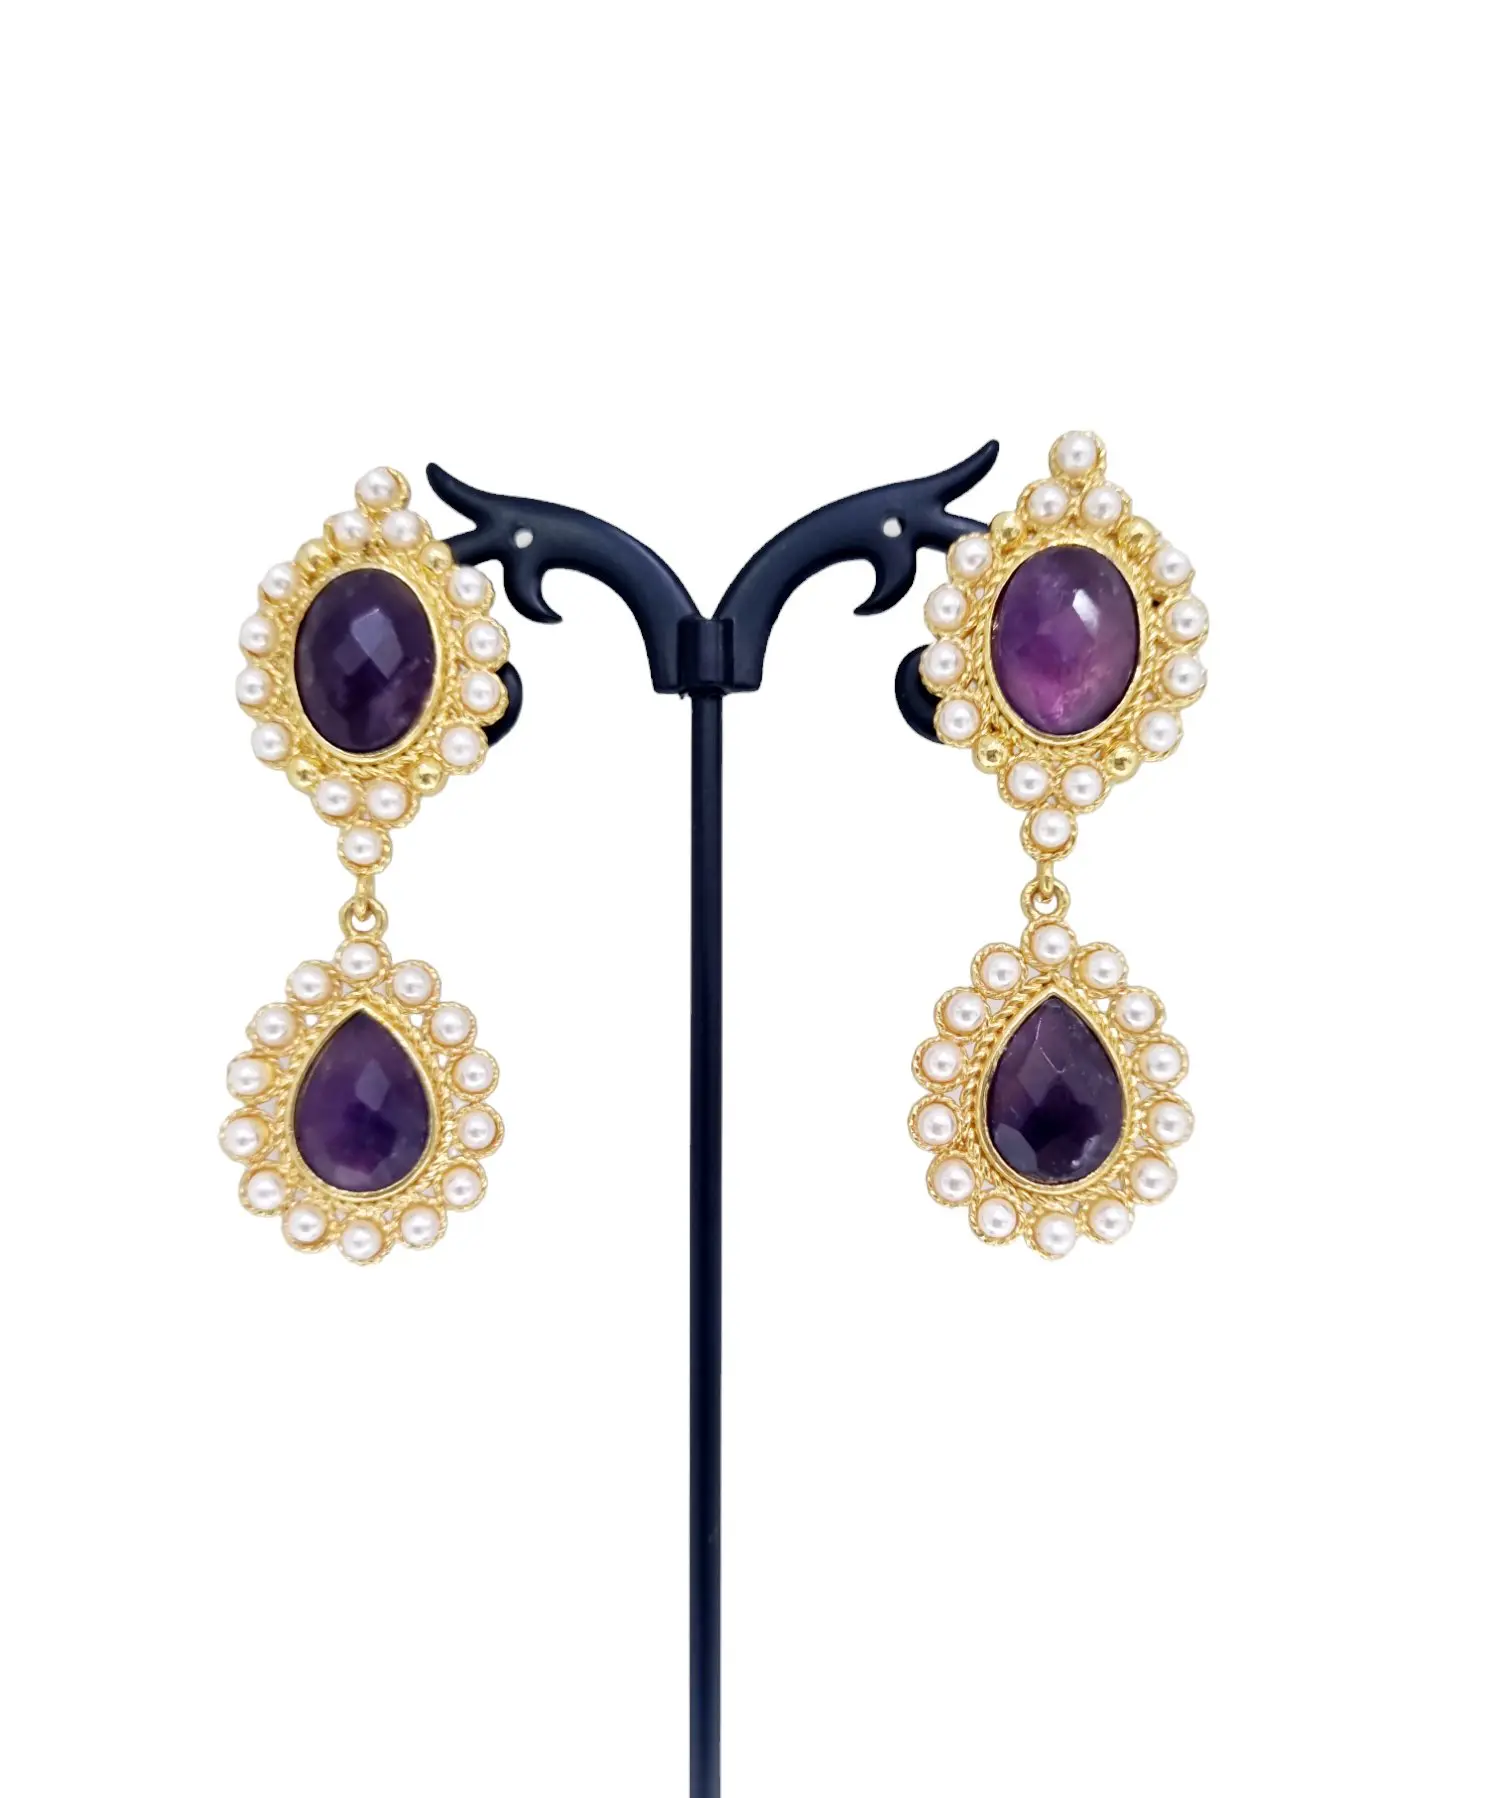 Amethyst and Mallorcan pearl earrings set in brass – Elegant and sophisticated accessory